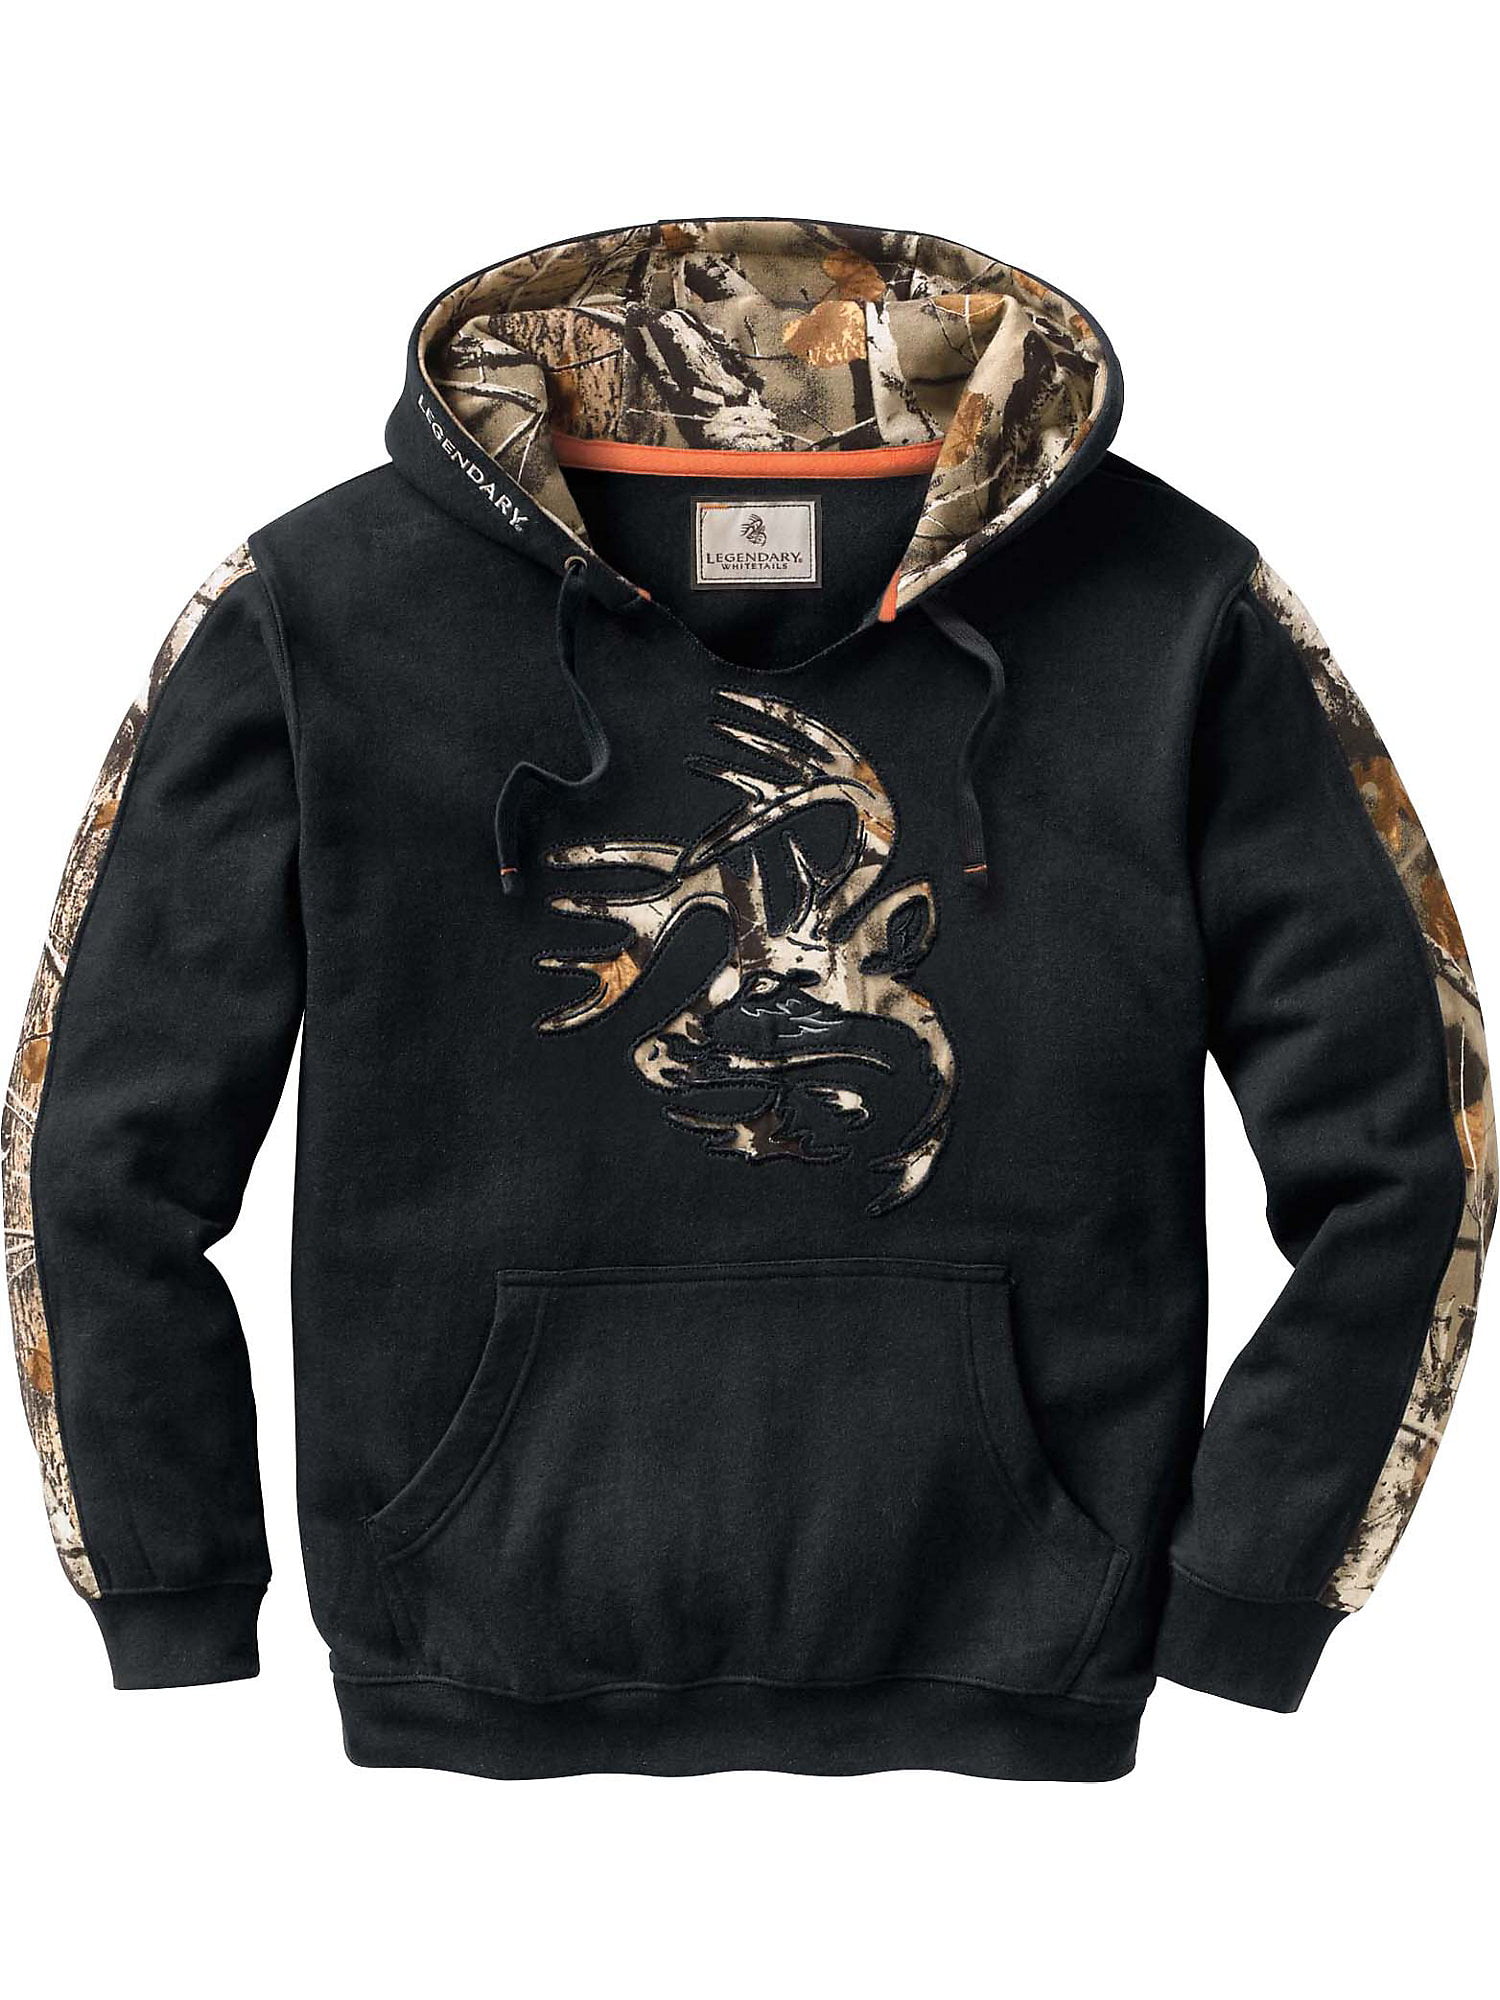 Legendary Whtietails Hunting Camping Fishing Hiking Antler White Pullover Hoodie 